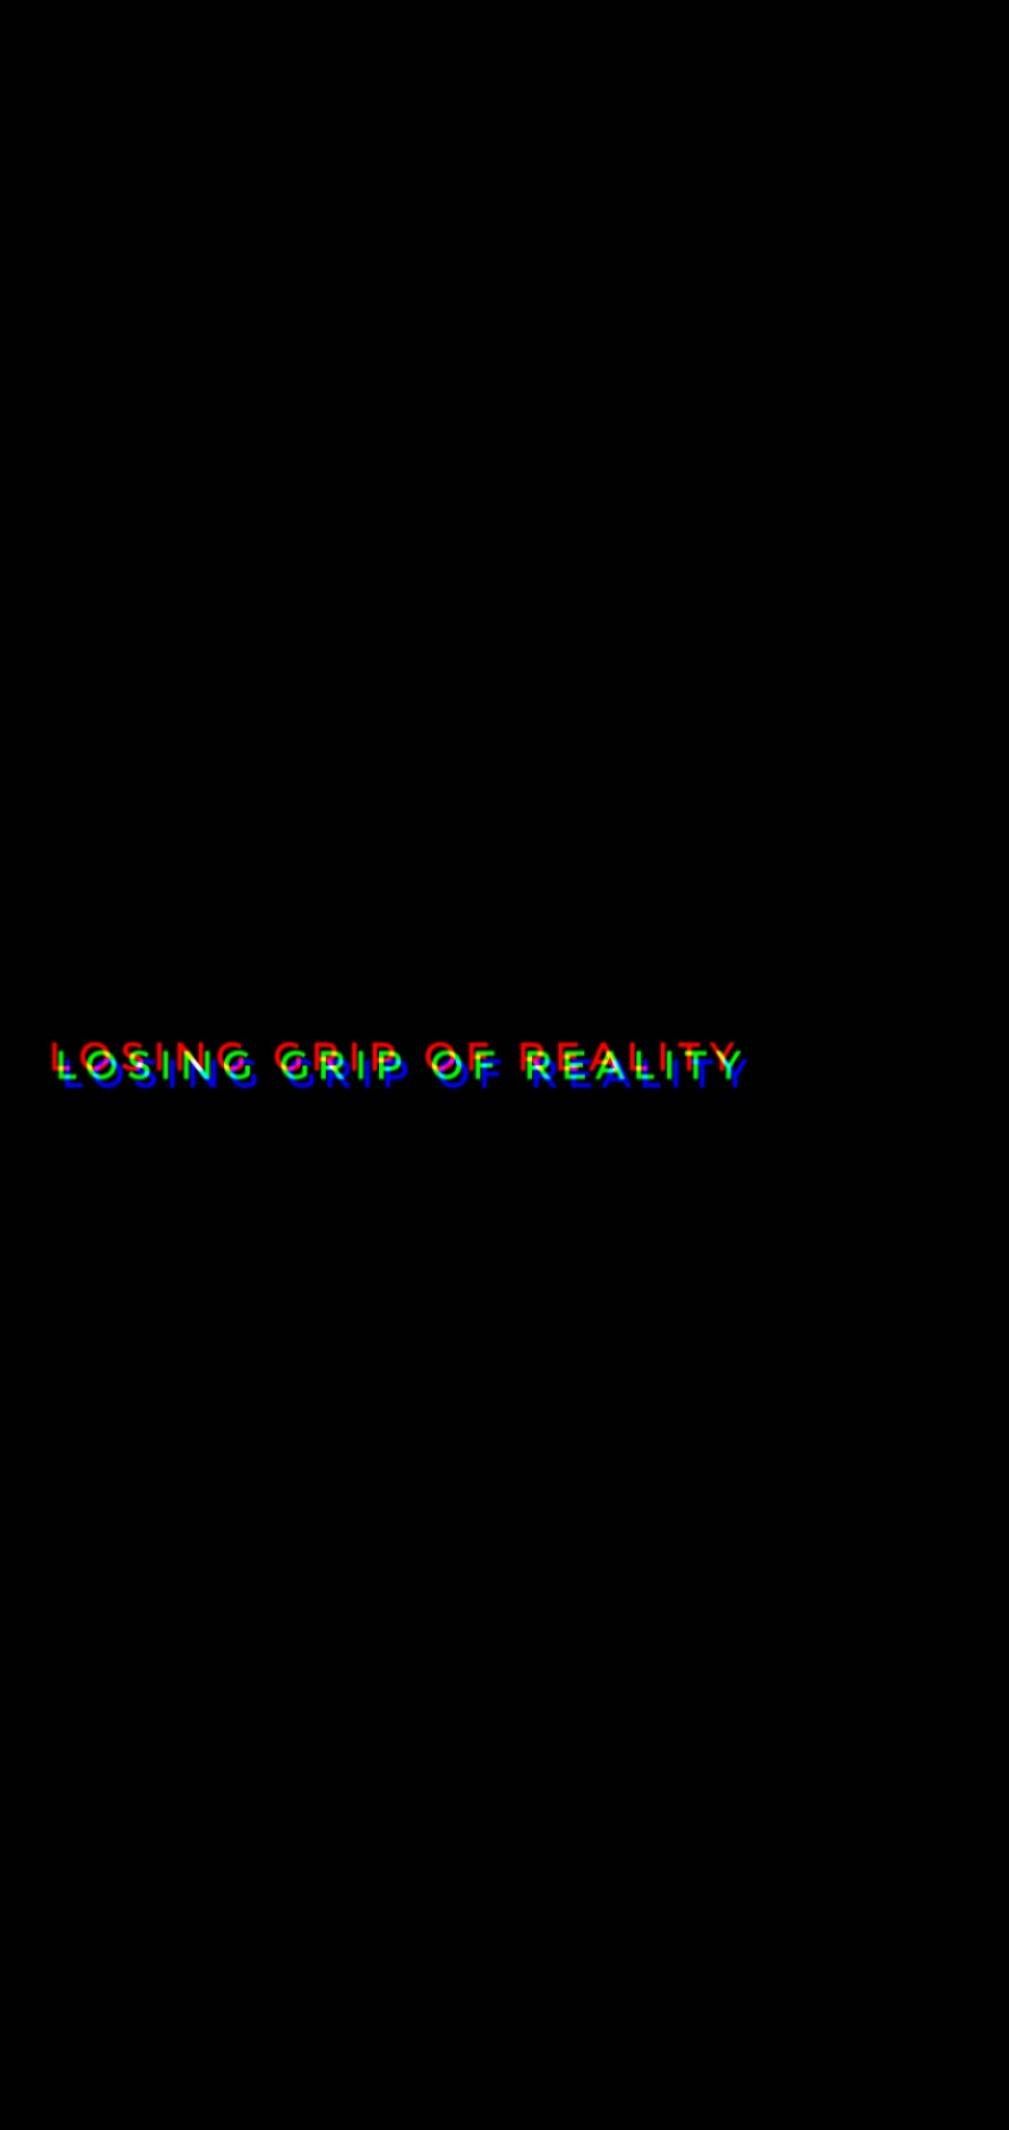 A black background with the words losing grip of reality - Depression, glitch